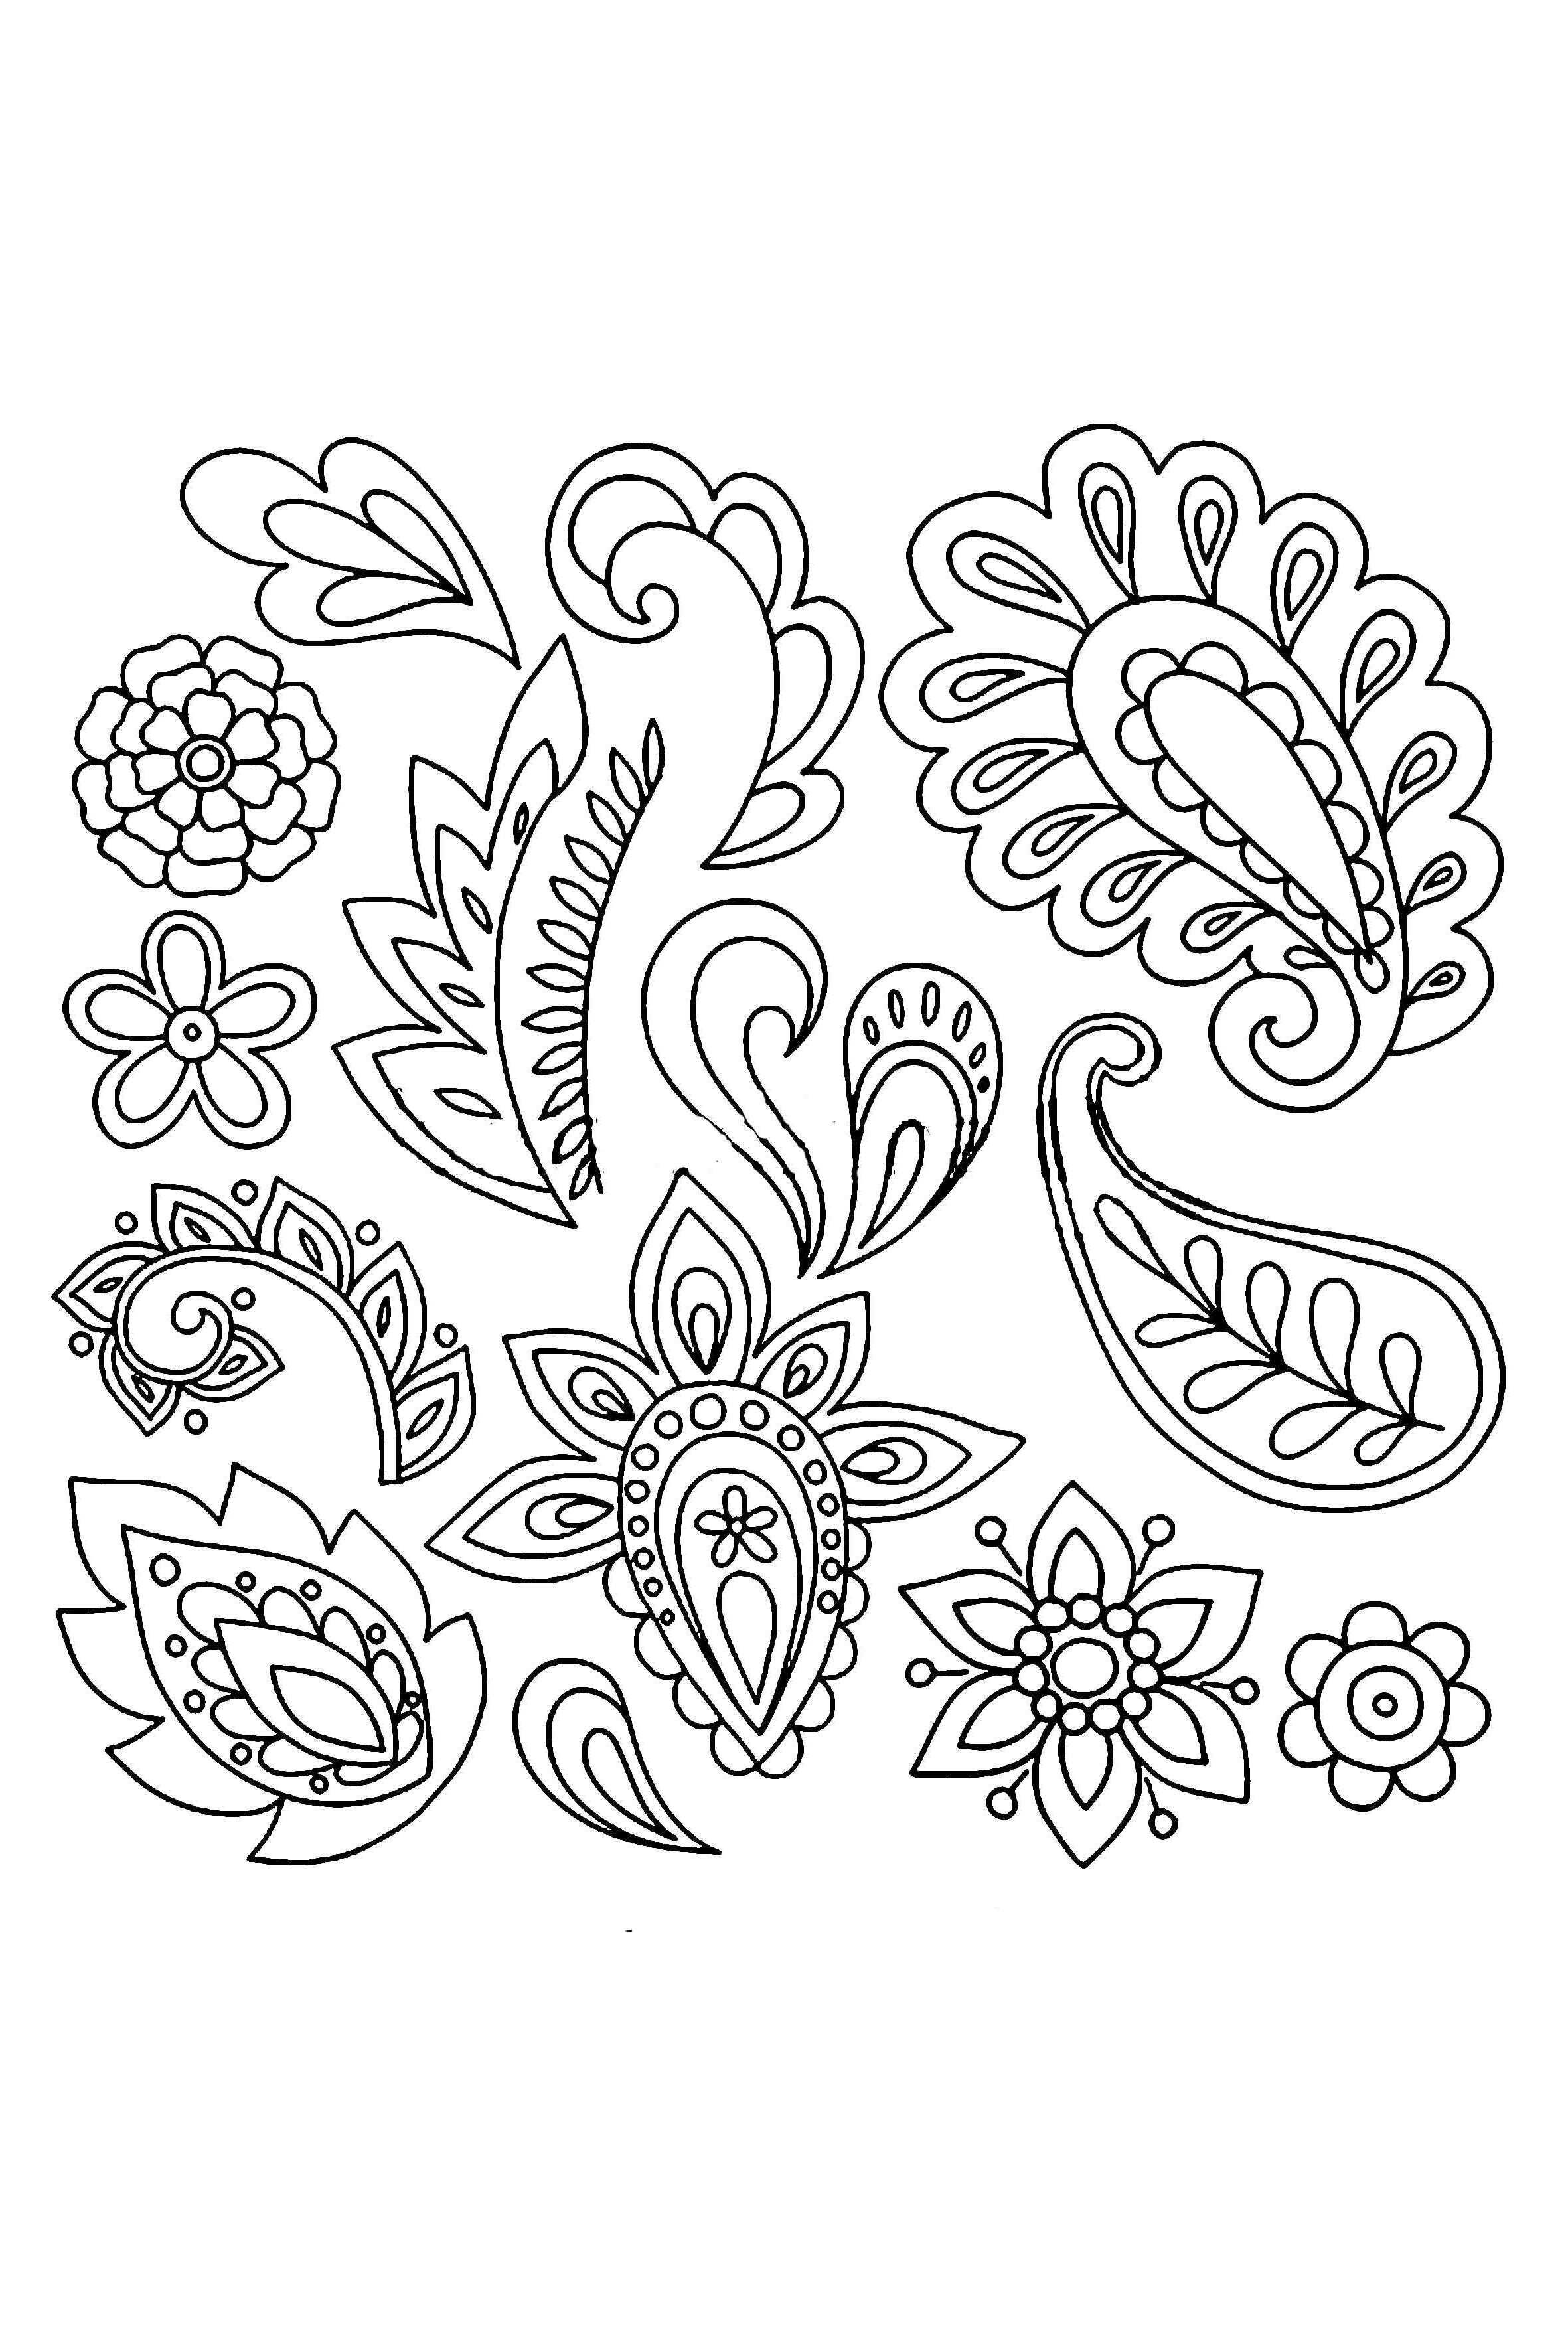 Paisley Design Drawing at PaintingValley.com | Explore collection of ...